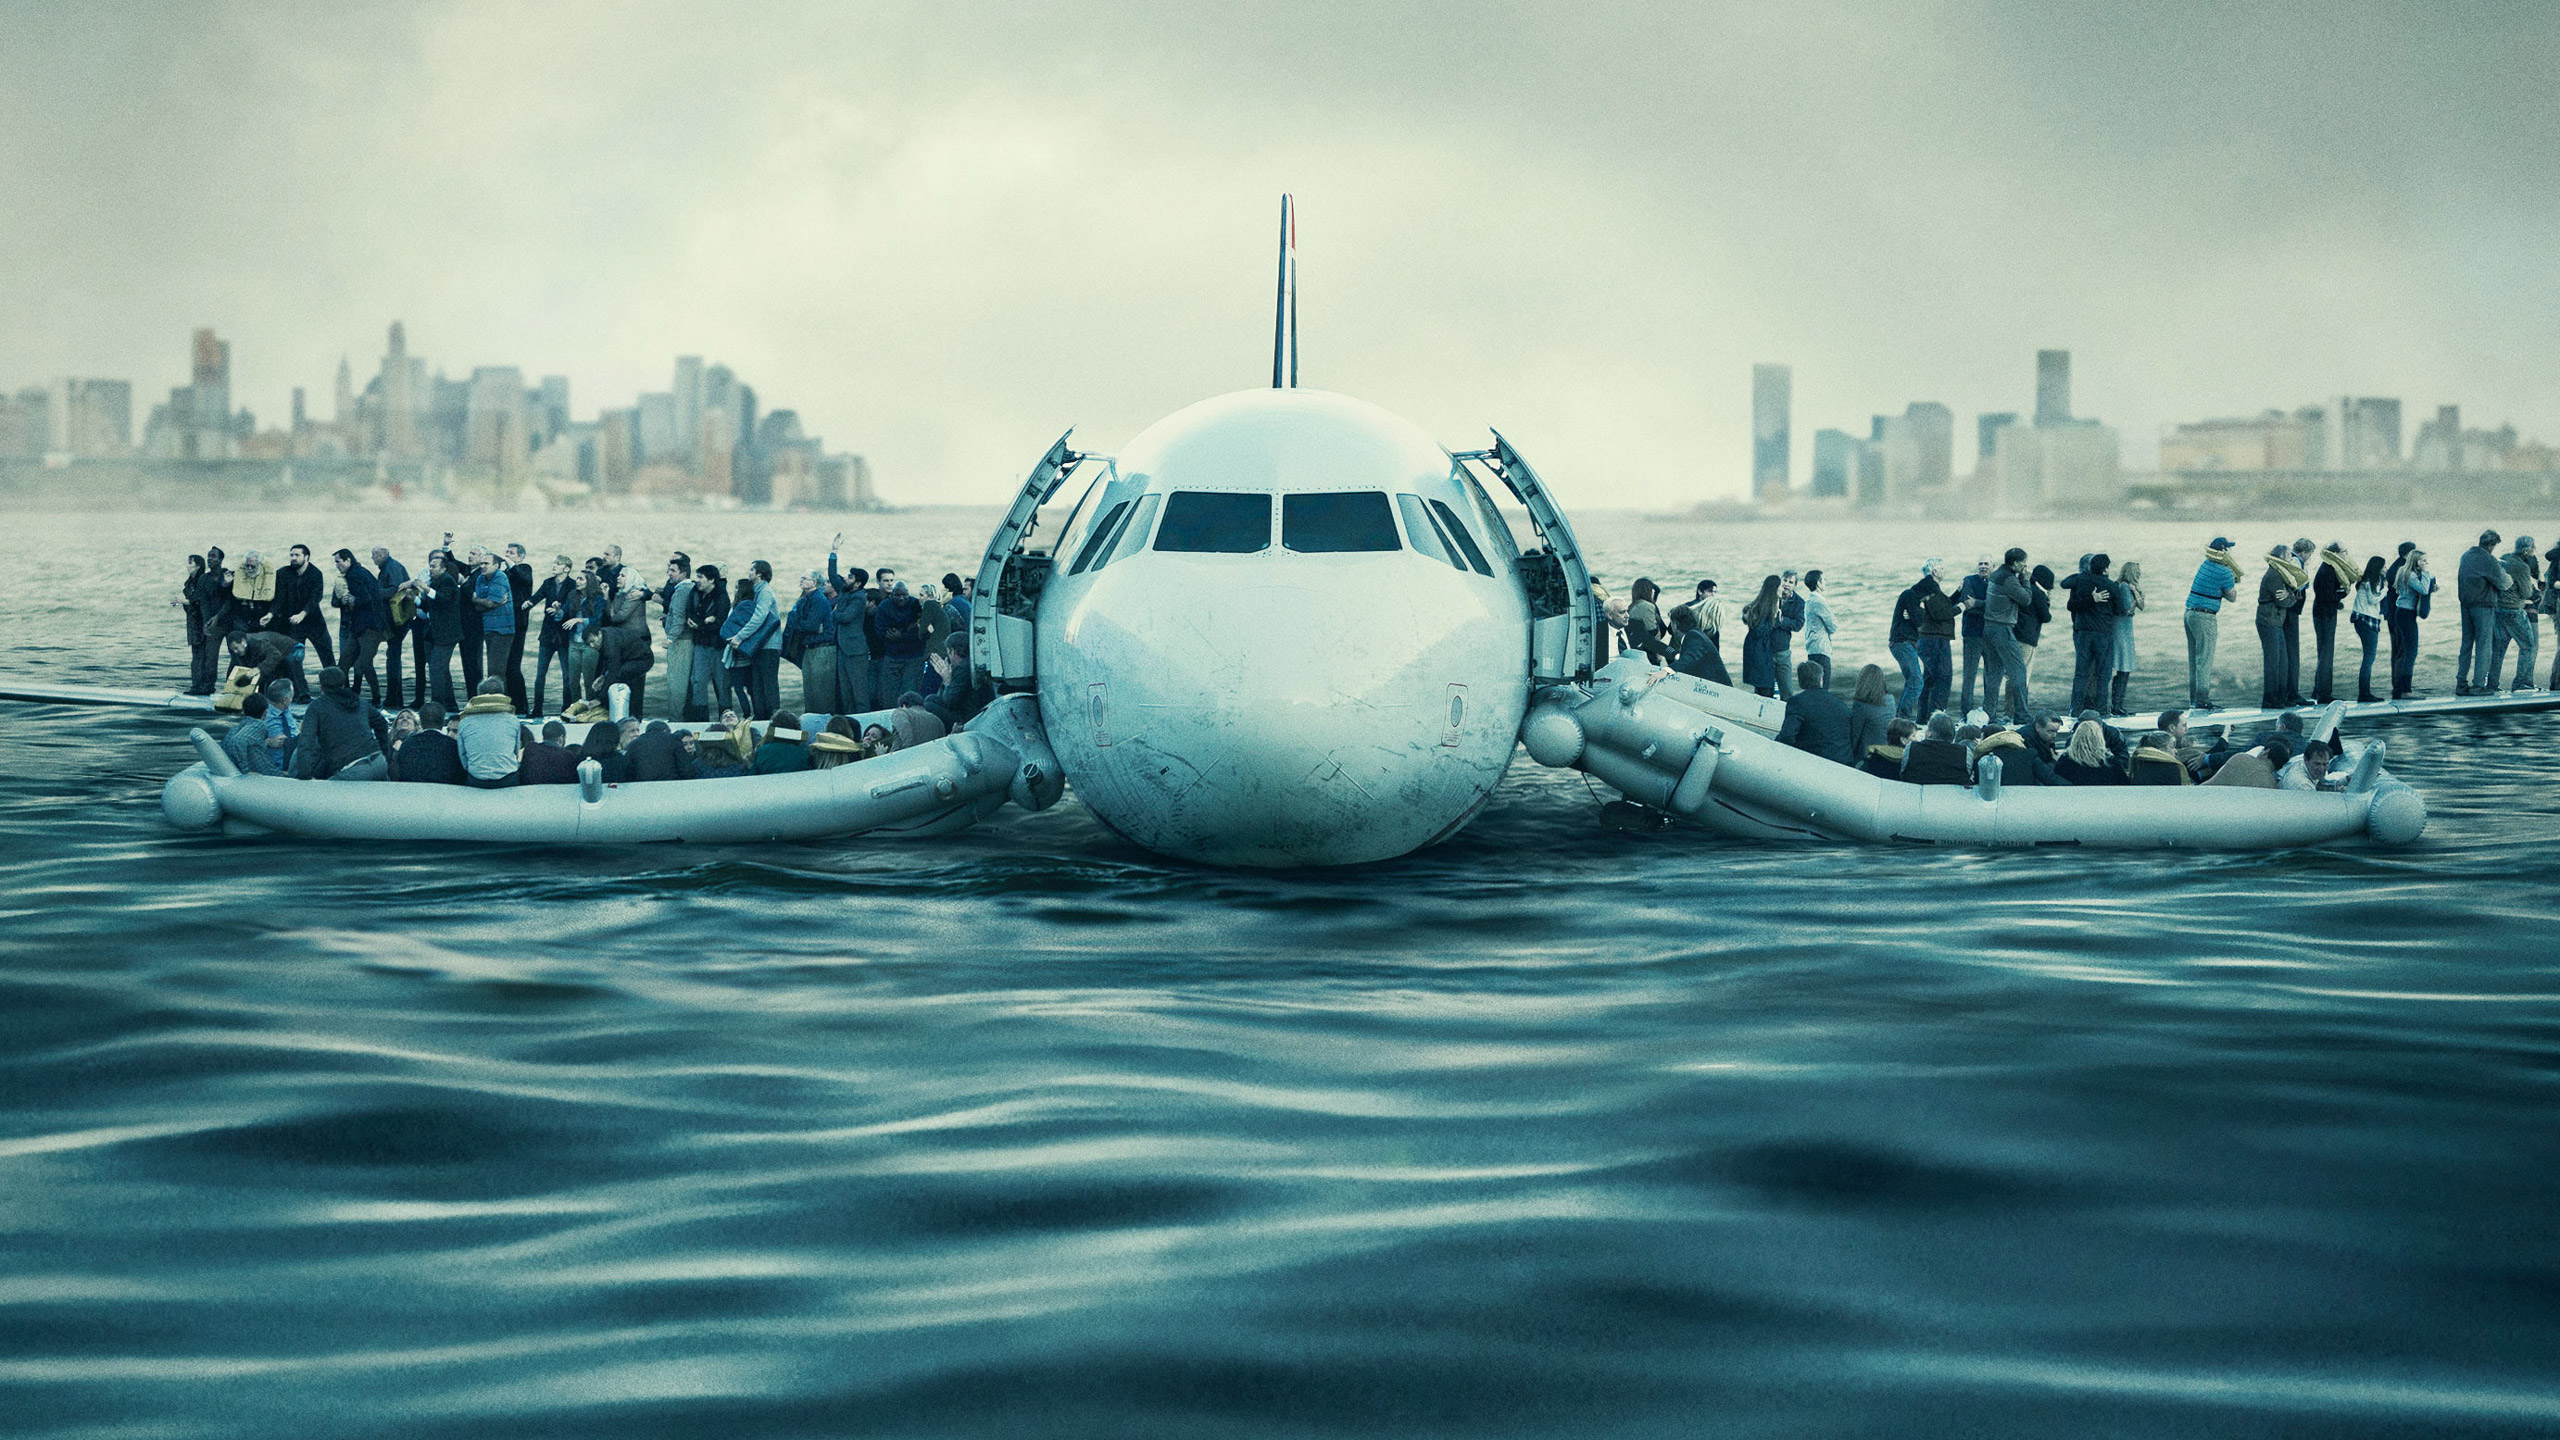 SULLY Is a Nice Tribute, But Struggles to Create Drama